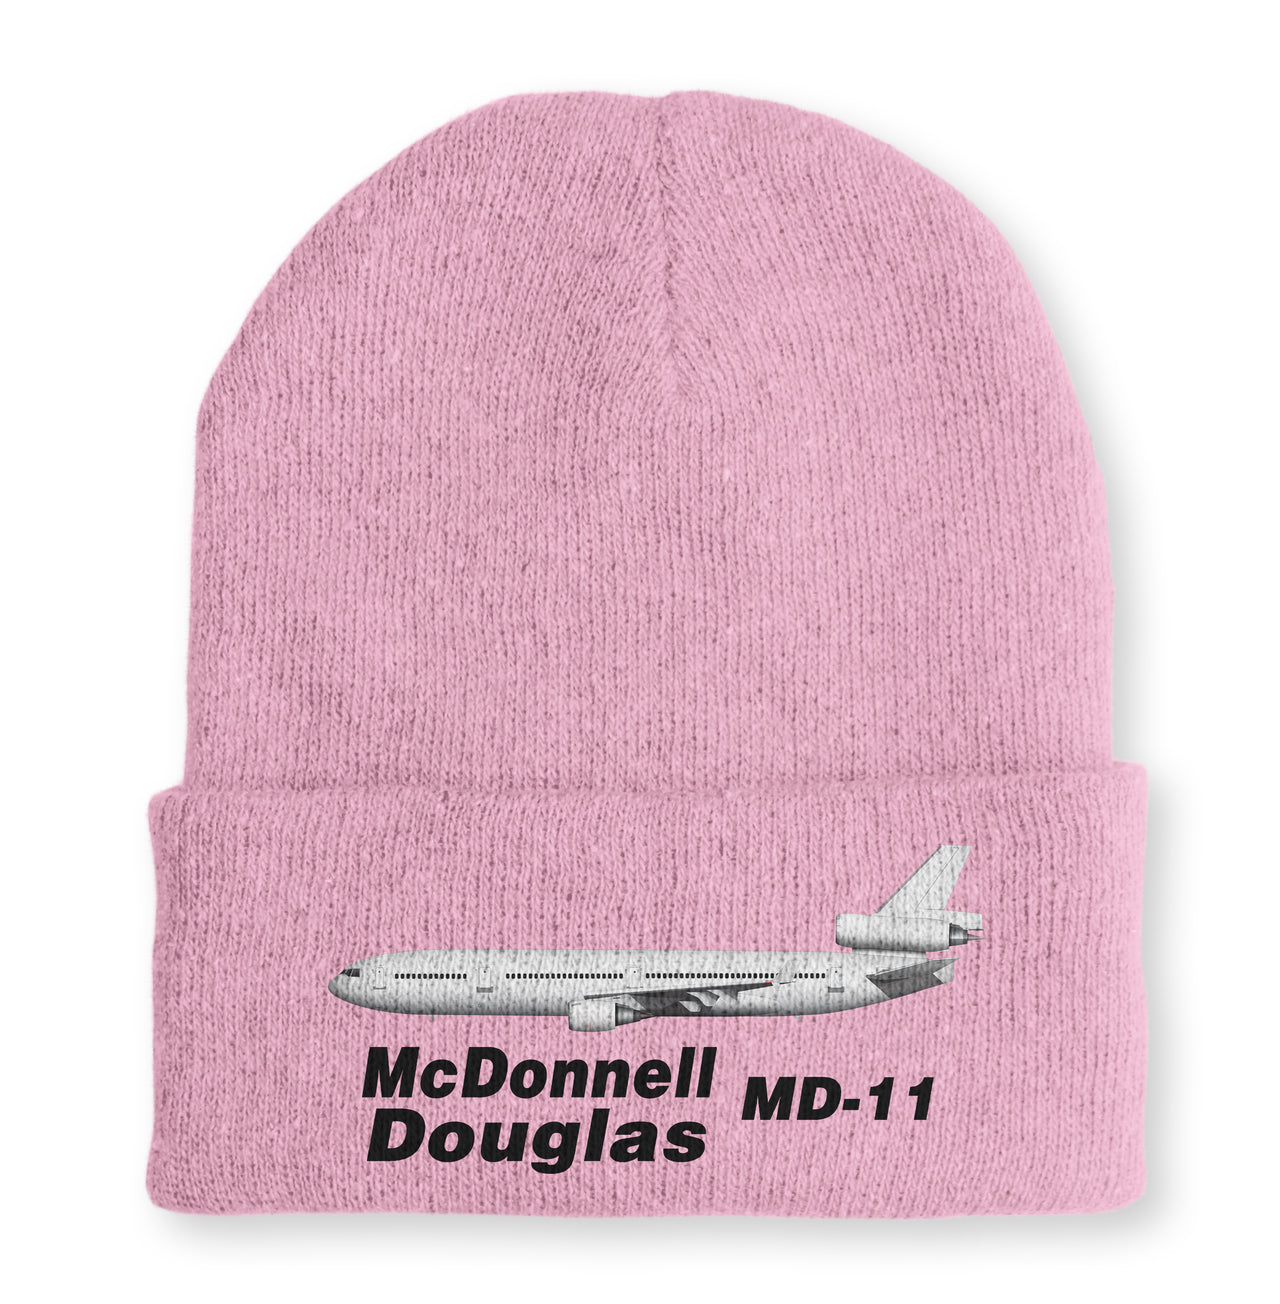 The McDonnell Douglas MD-11 Embroidered Beanies